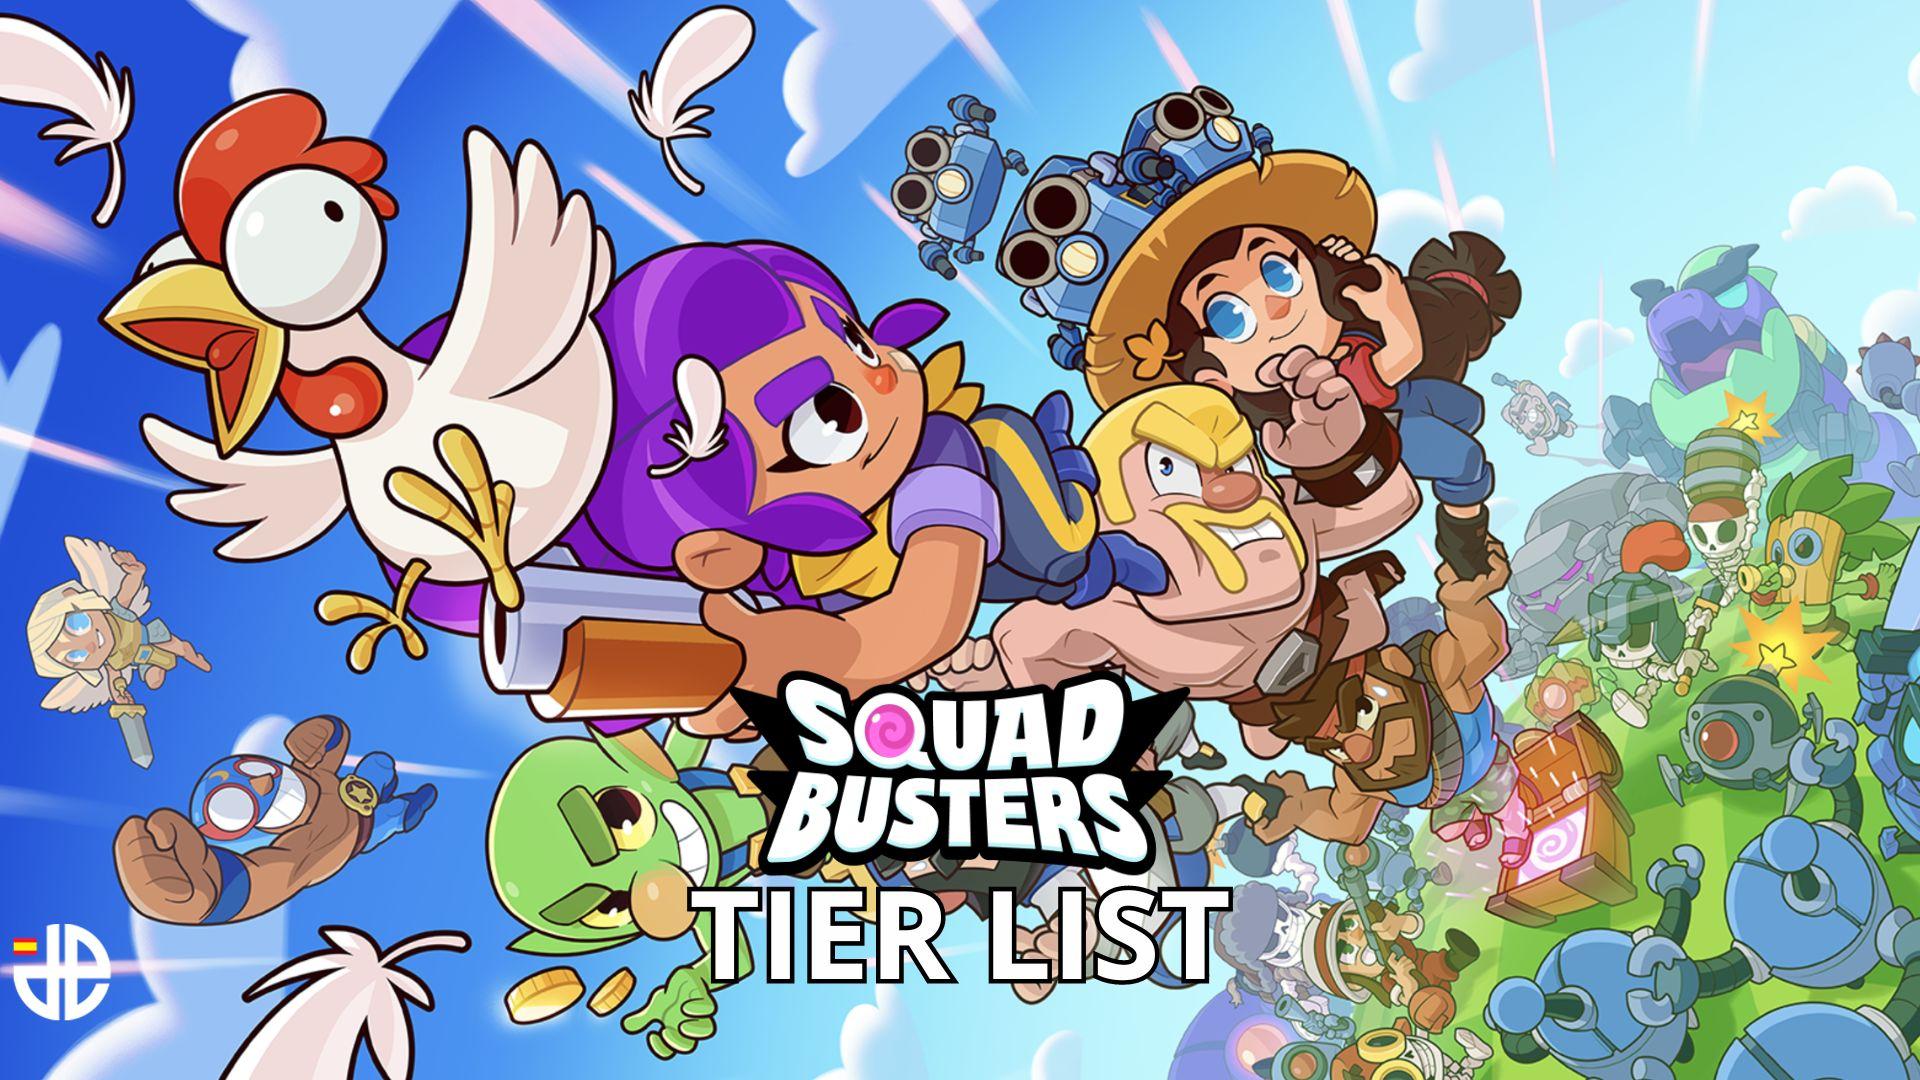 TIER LIST SQUAD BUSTERS